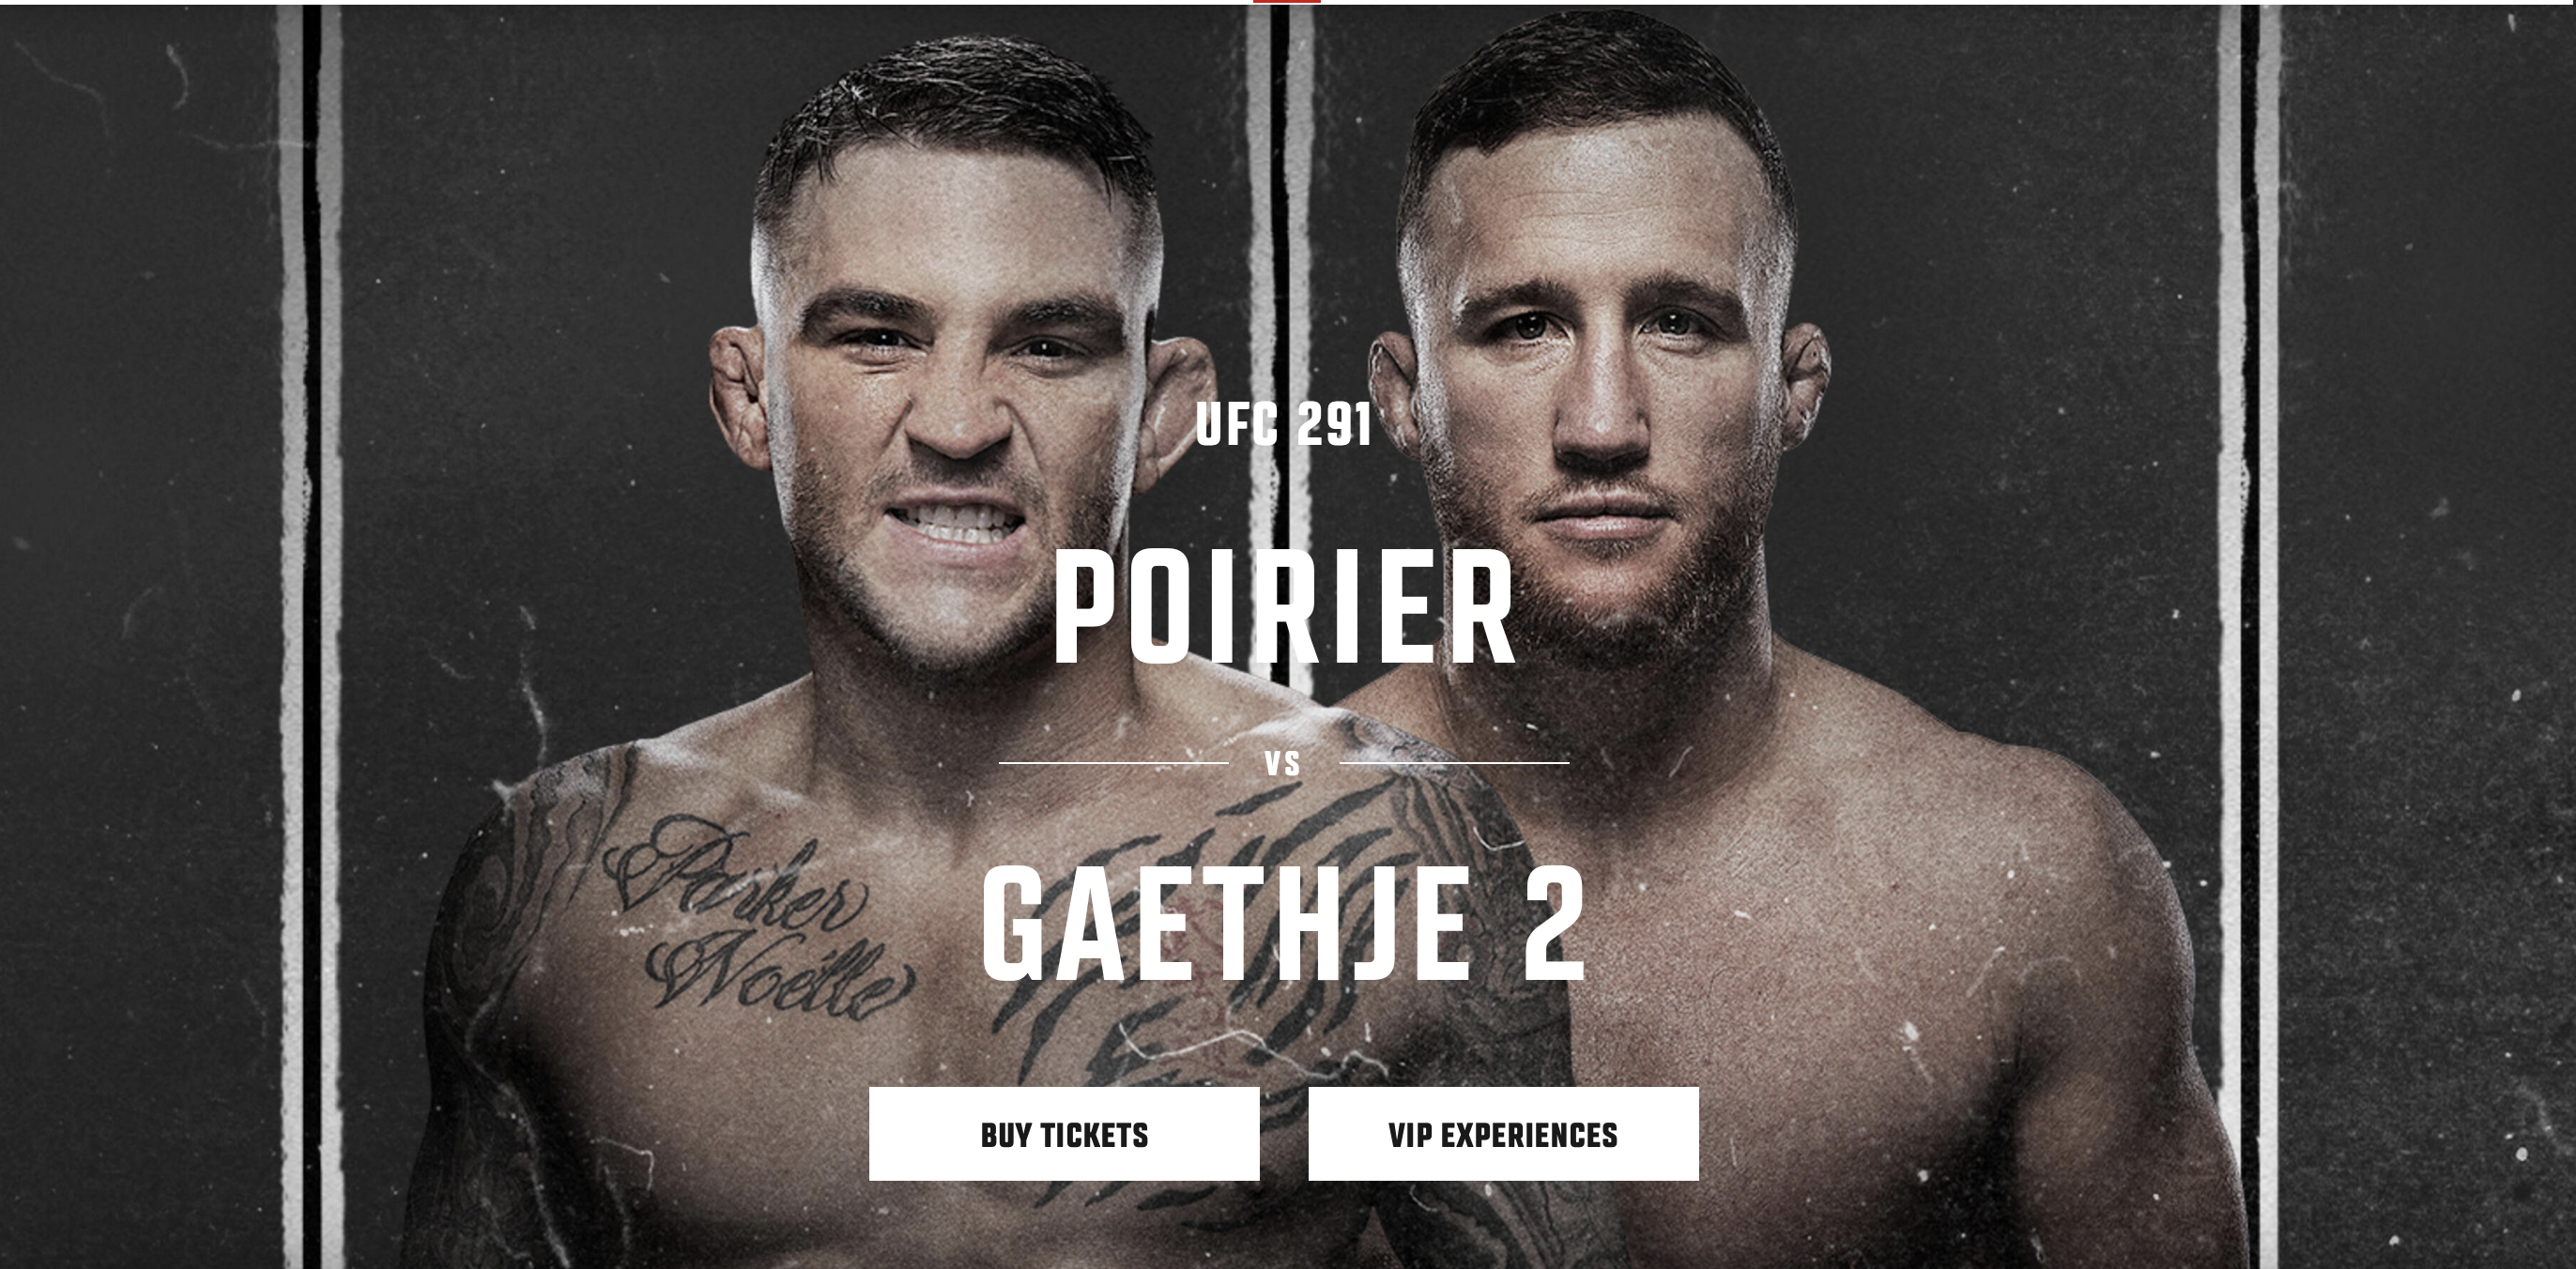 The UFC 291 main card features the rematch of Justin Gaethje and Dustin Poirier